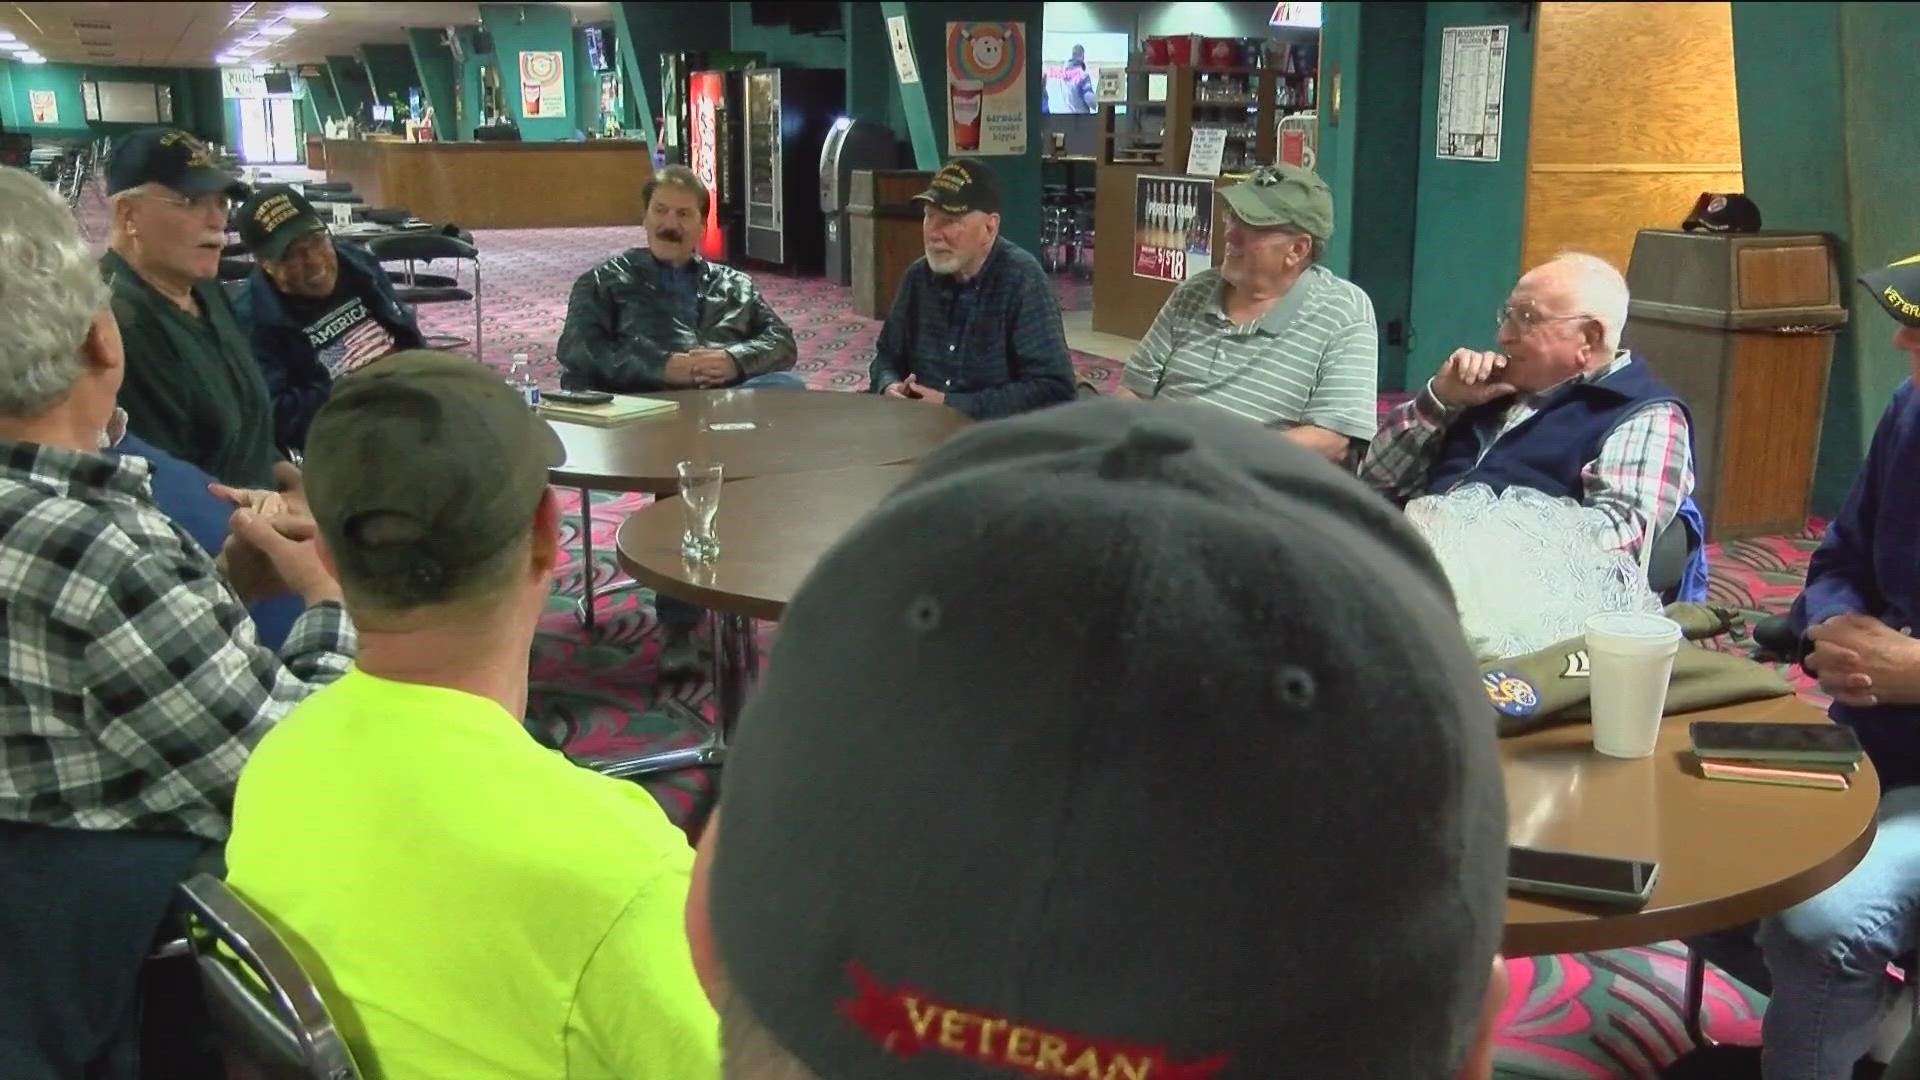 The meetup began with a peer group at the U.S. Department of Veterans Affairs. After their counselor left, the veterans had nowhere to go. Then Al Pinski stepped in.